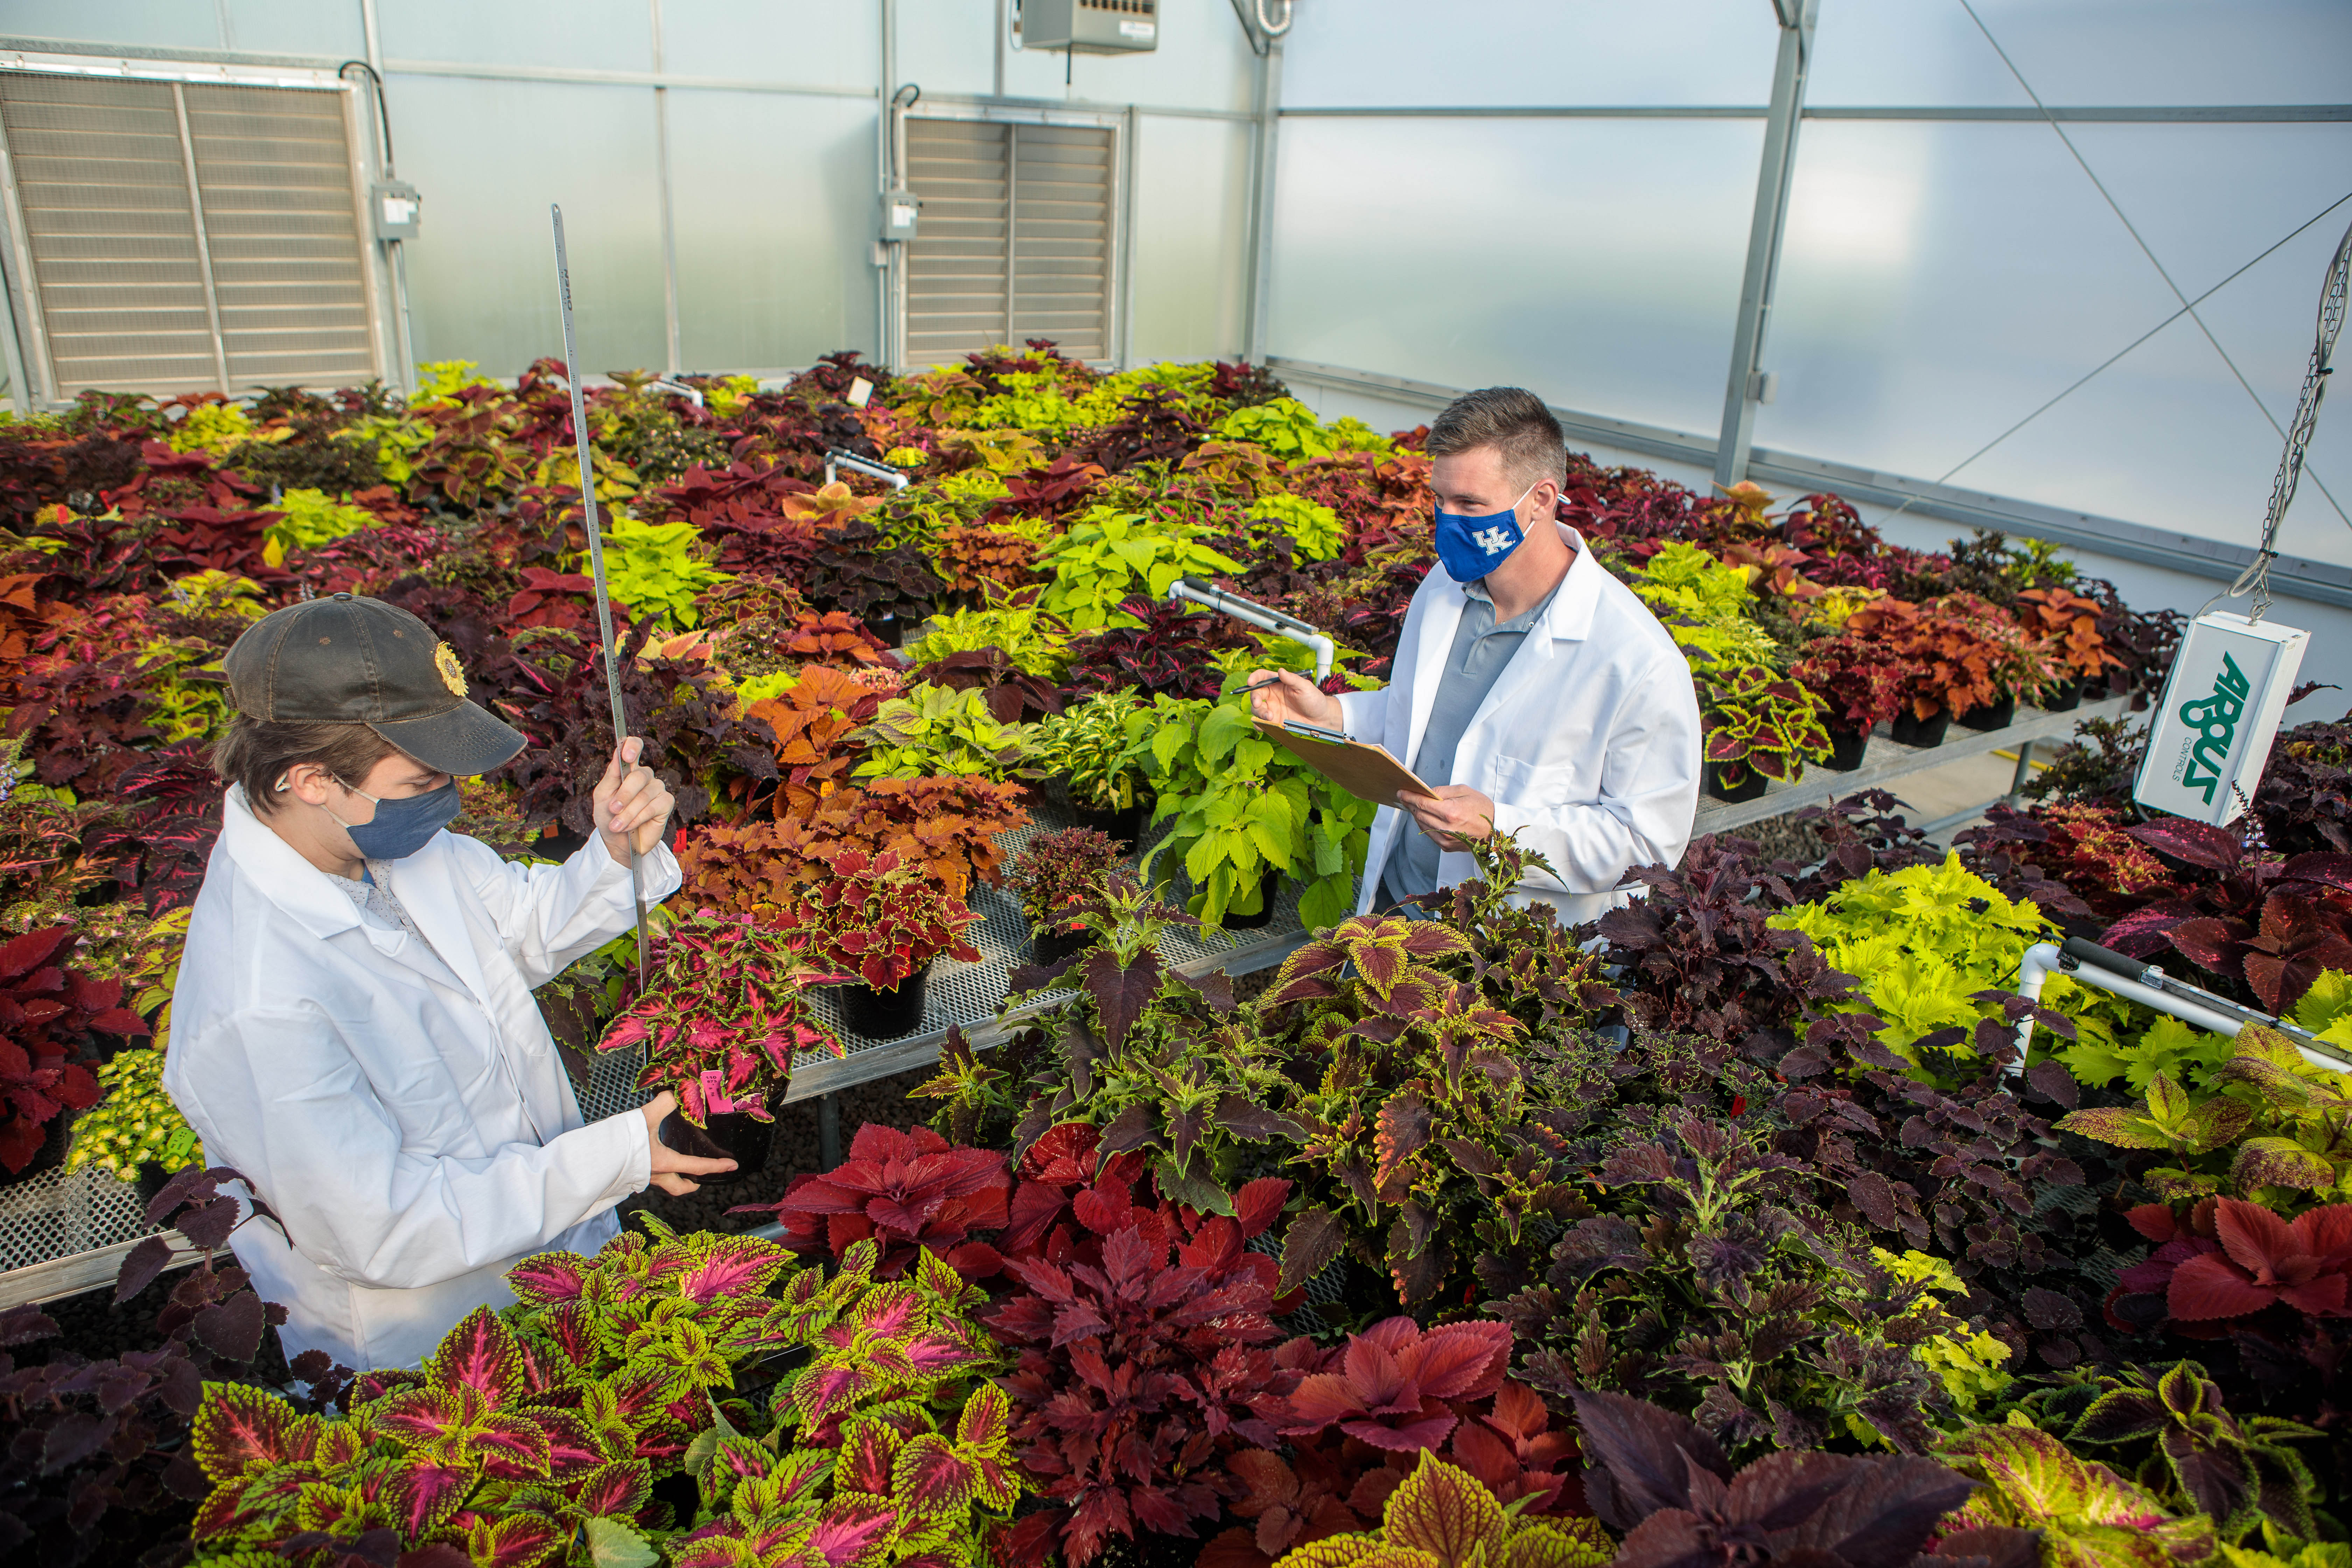 Project lead Ty Rich (left) and Paul Cockson record data in a coleus cultivar trial at the UK Horticultural Research Farm. Photo by Matt Barton